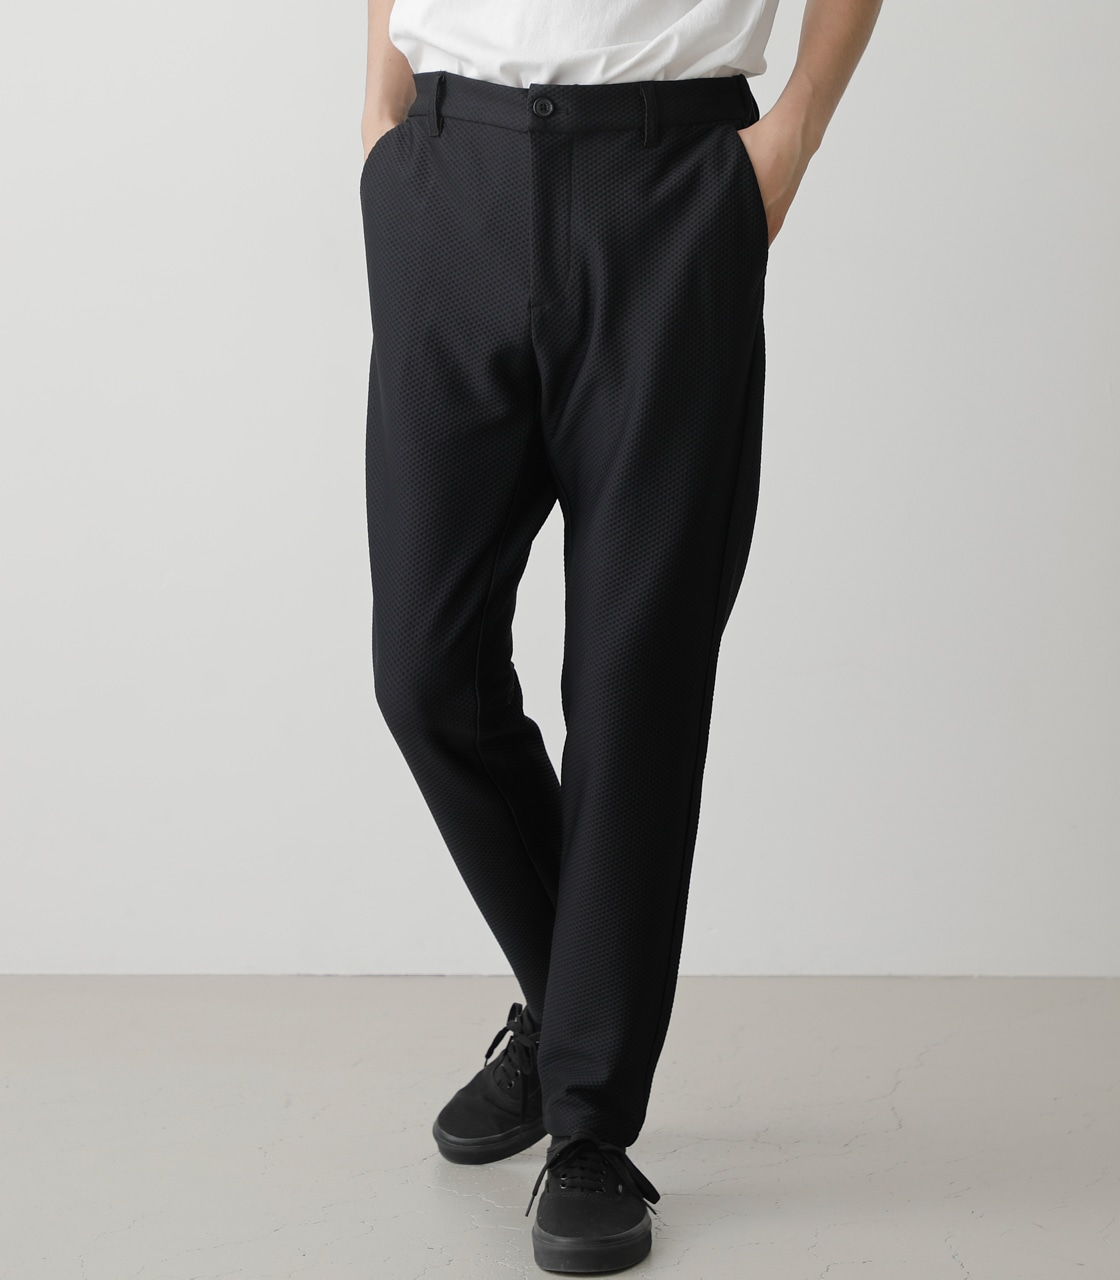 WAFFLE STRETCH PANTS/ワッフルストレッチパンツ 詳細画像 BLK 1